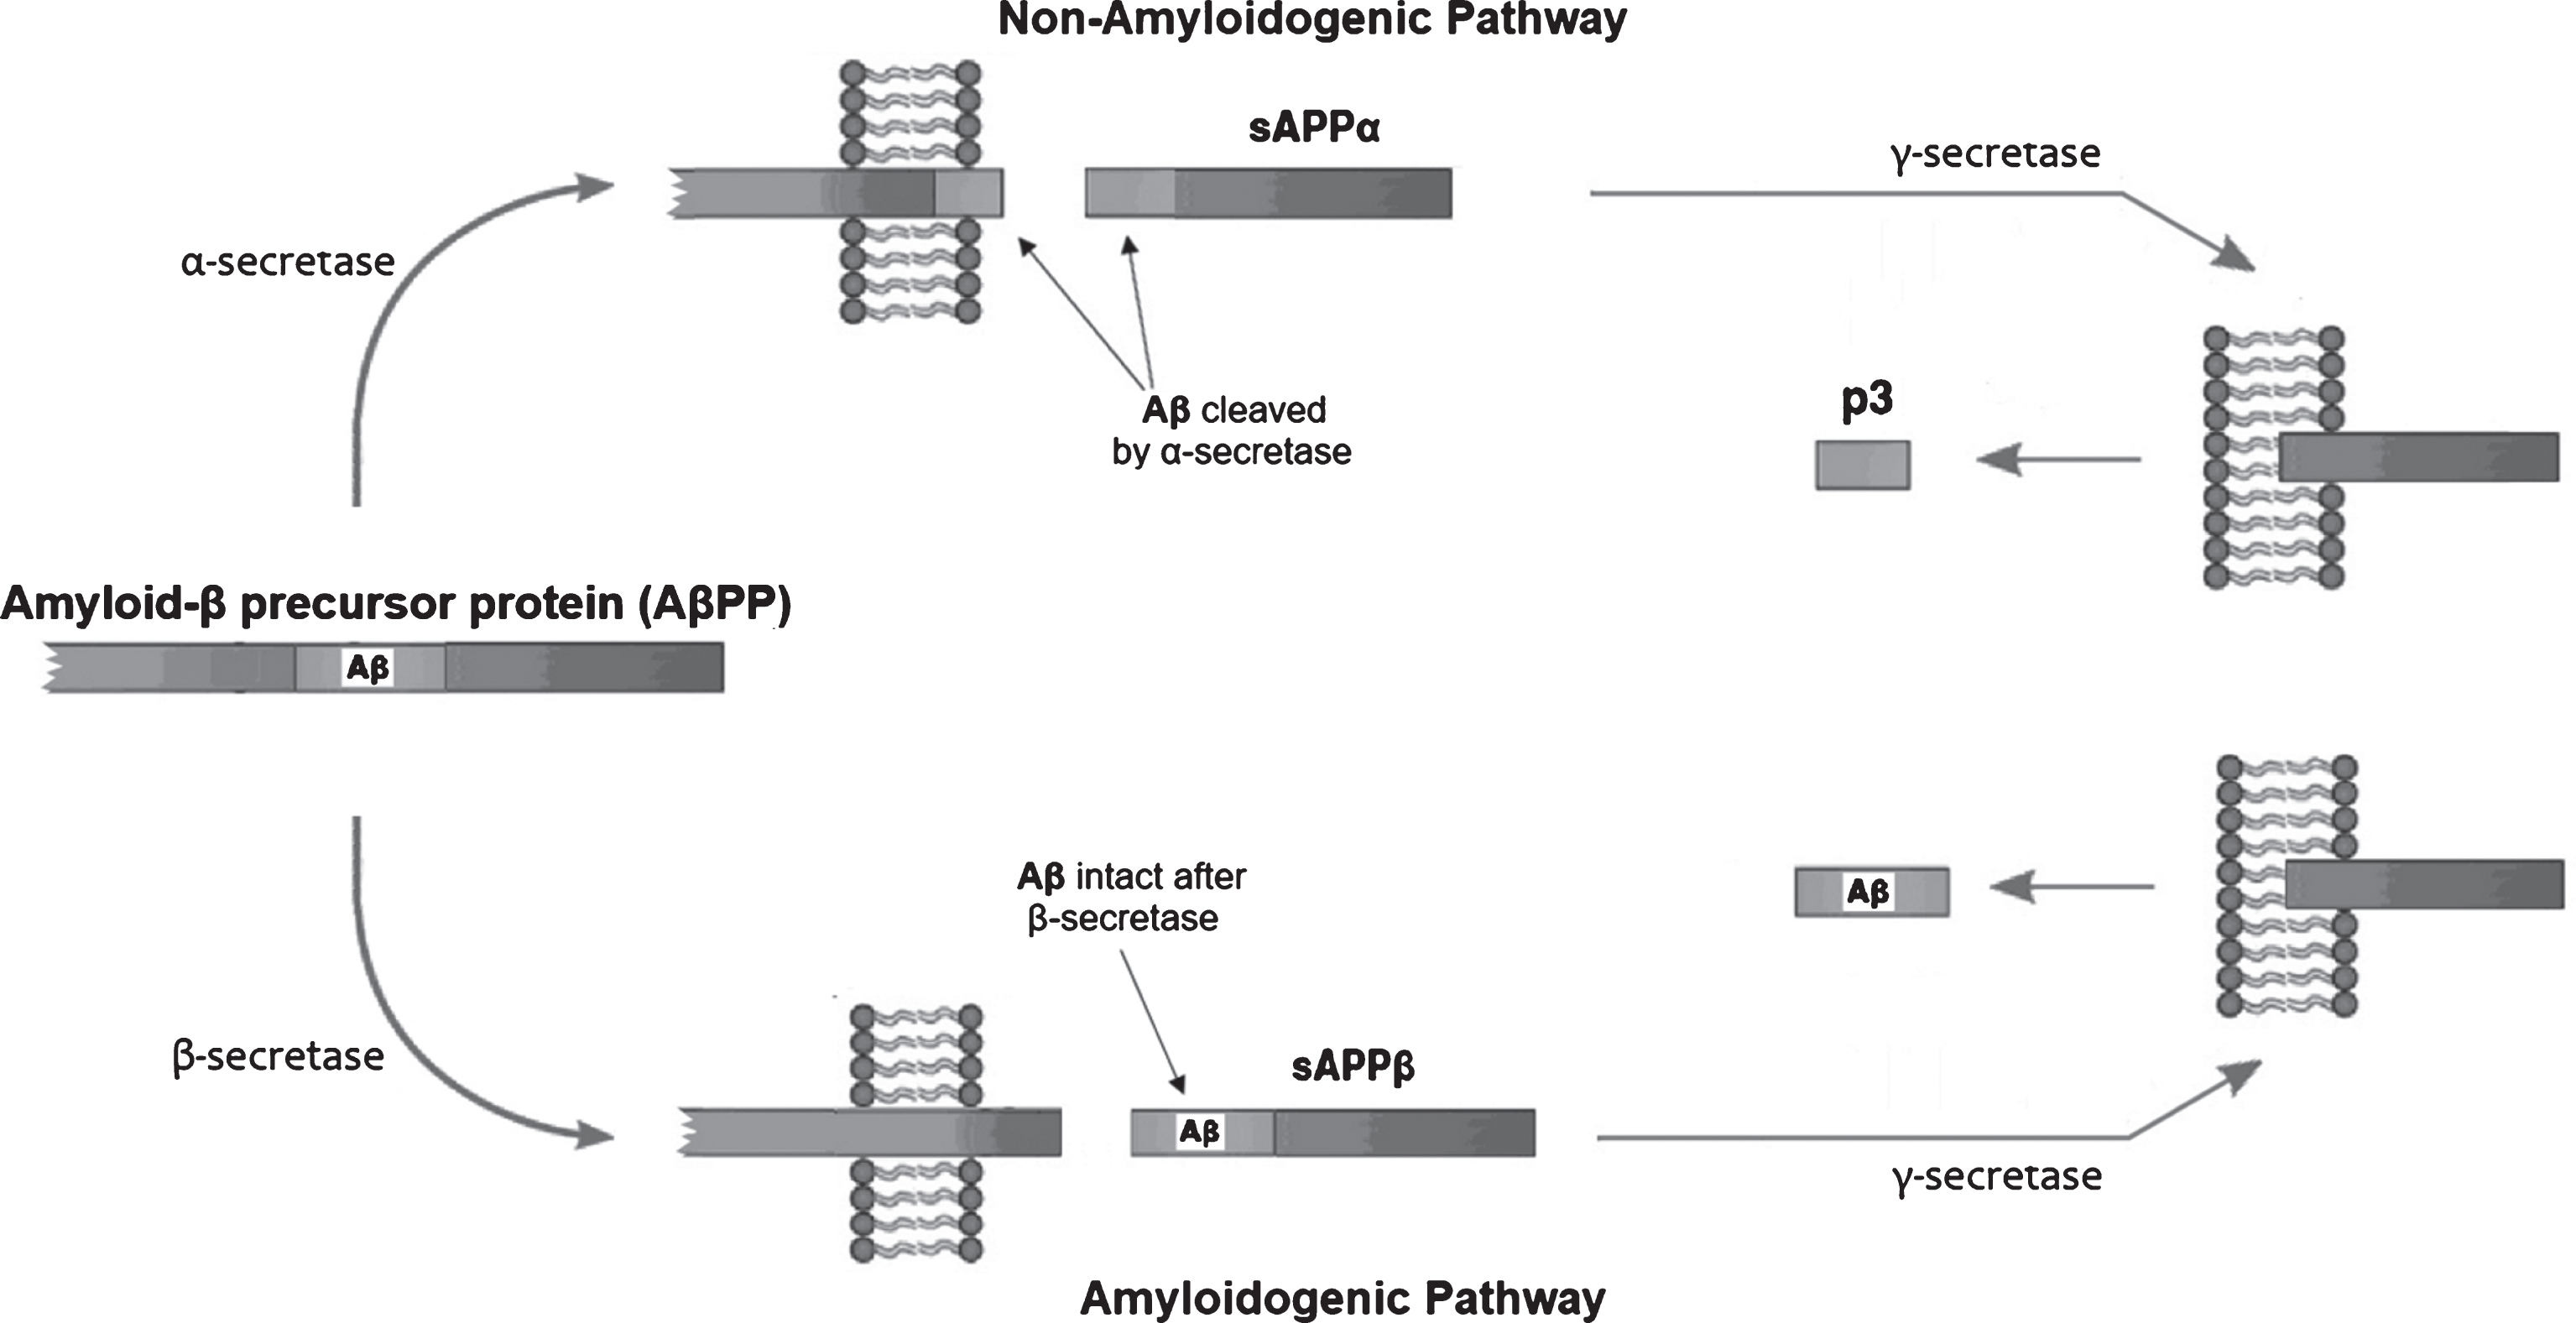 The generation of products from the amyloid-β protein precursor (AβPP). During periods of central nervous system (CNS) energy adequacy, AβPP will get cleaved along a non-amyloidogenic pathway by the action of α-secretase to produce sAβPPα, which, after the action of γ-secretase, produces p3 peptides which have an ability to exit the CNS through the blood-brain barrier (BBB). During periods of CNS energy inadequacy, AβPP gets cleaved along an amyloidogenic pathway by the action of β-secretase to product sAβPPβ, which, after the action of γ-secretase, produces intact amyloid-β (Aβ) peptides that cannot effectively exit the CNS through the BBB, and are associated with the pathogenesis of Alzheimer’s disease. Adapted from [32] (CC BY 4.0).